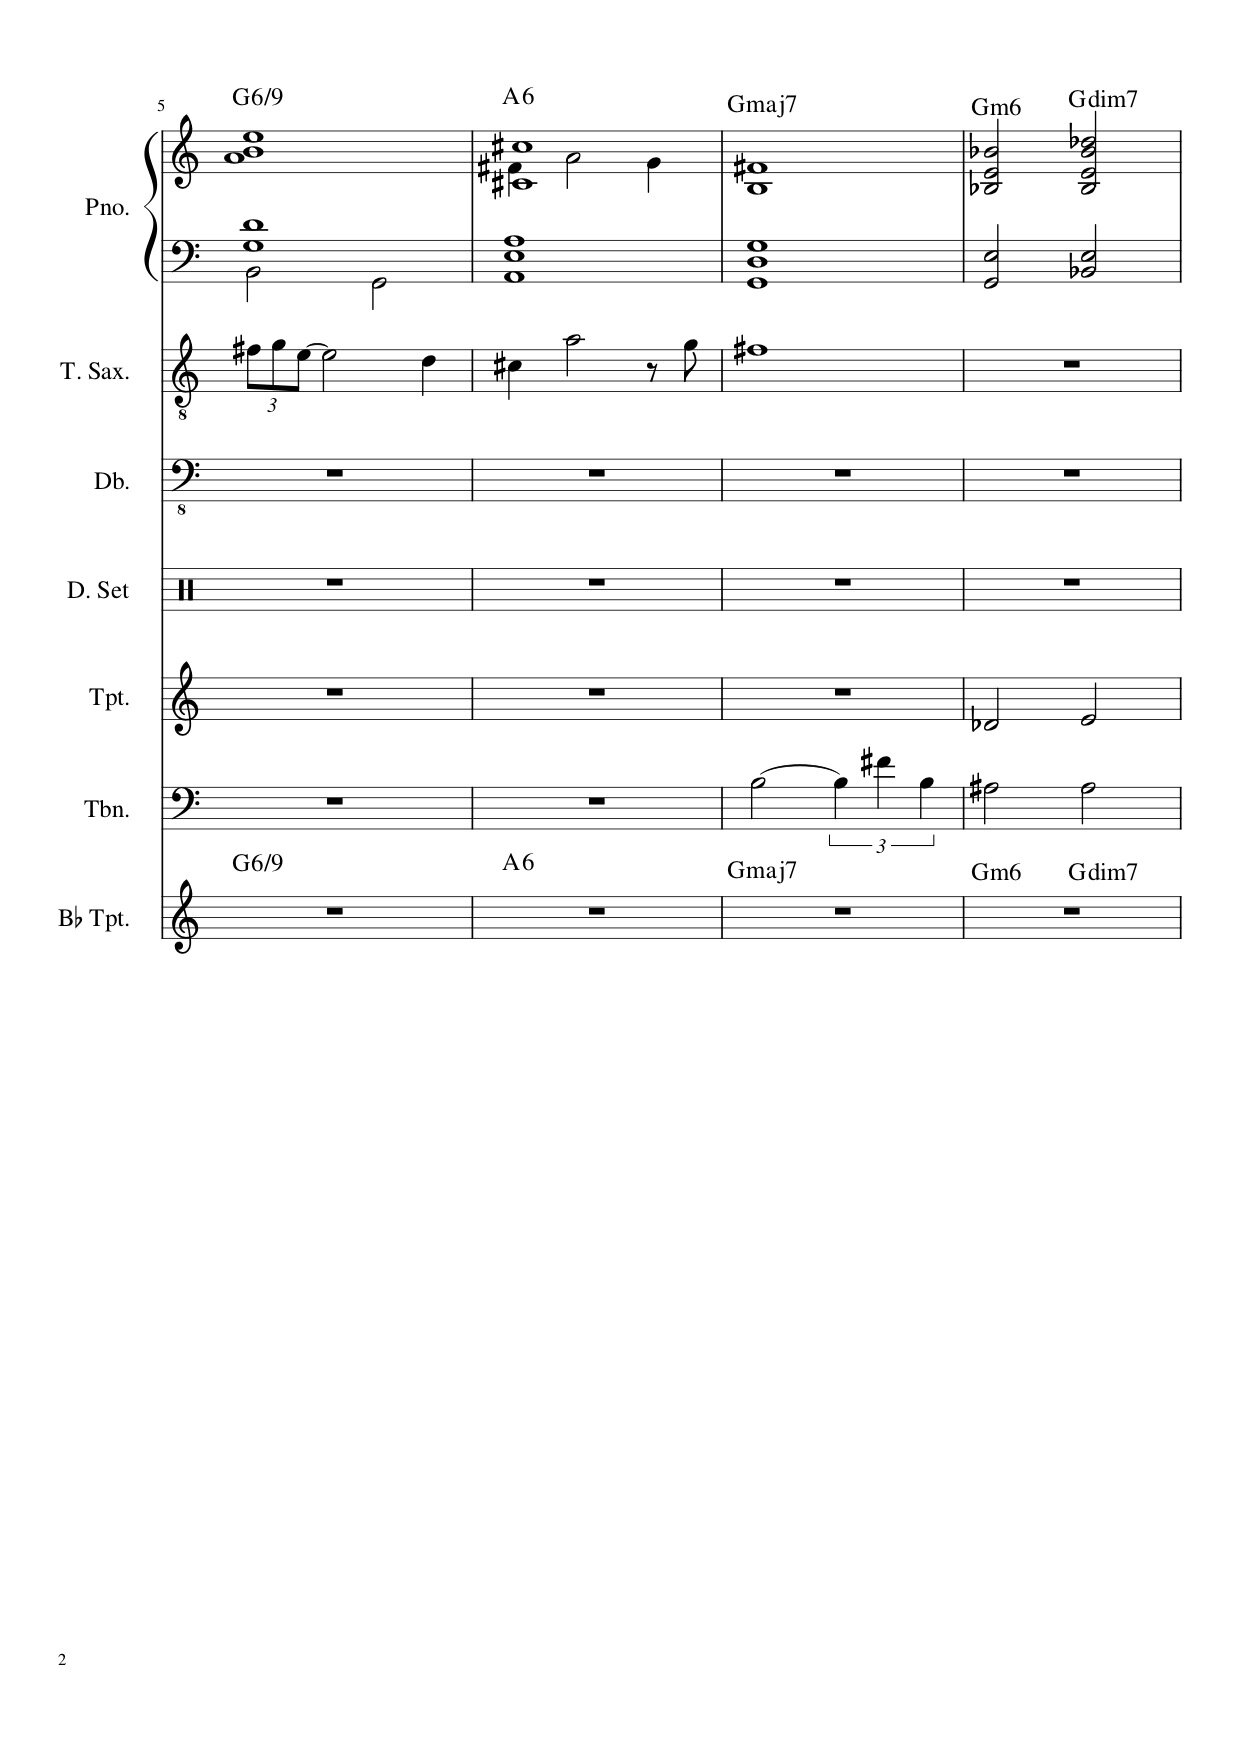 Steal Suffering Theme-Score_and_Parts pg2.jpg